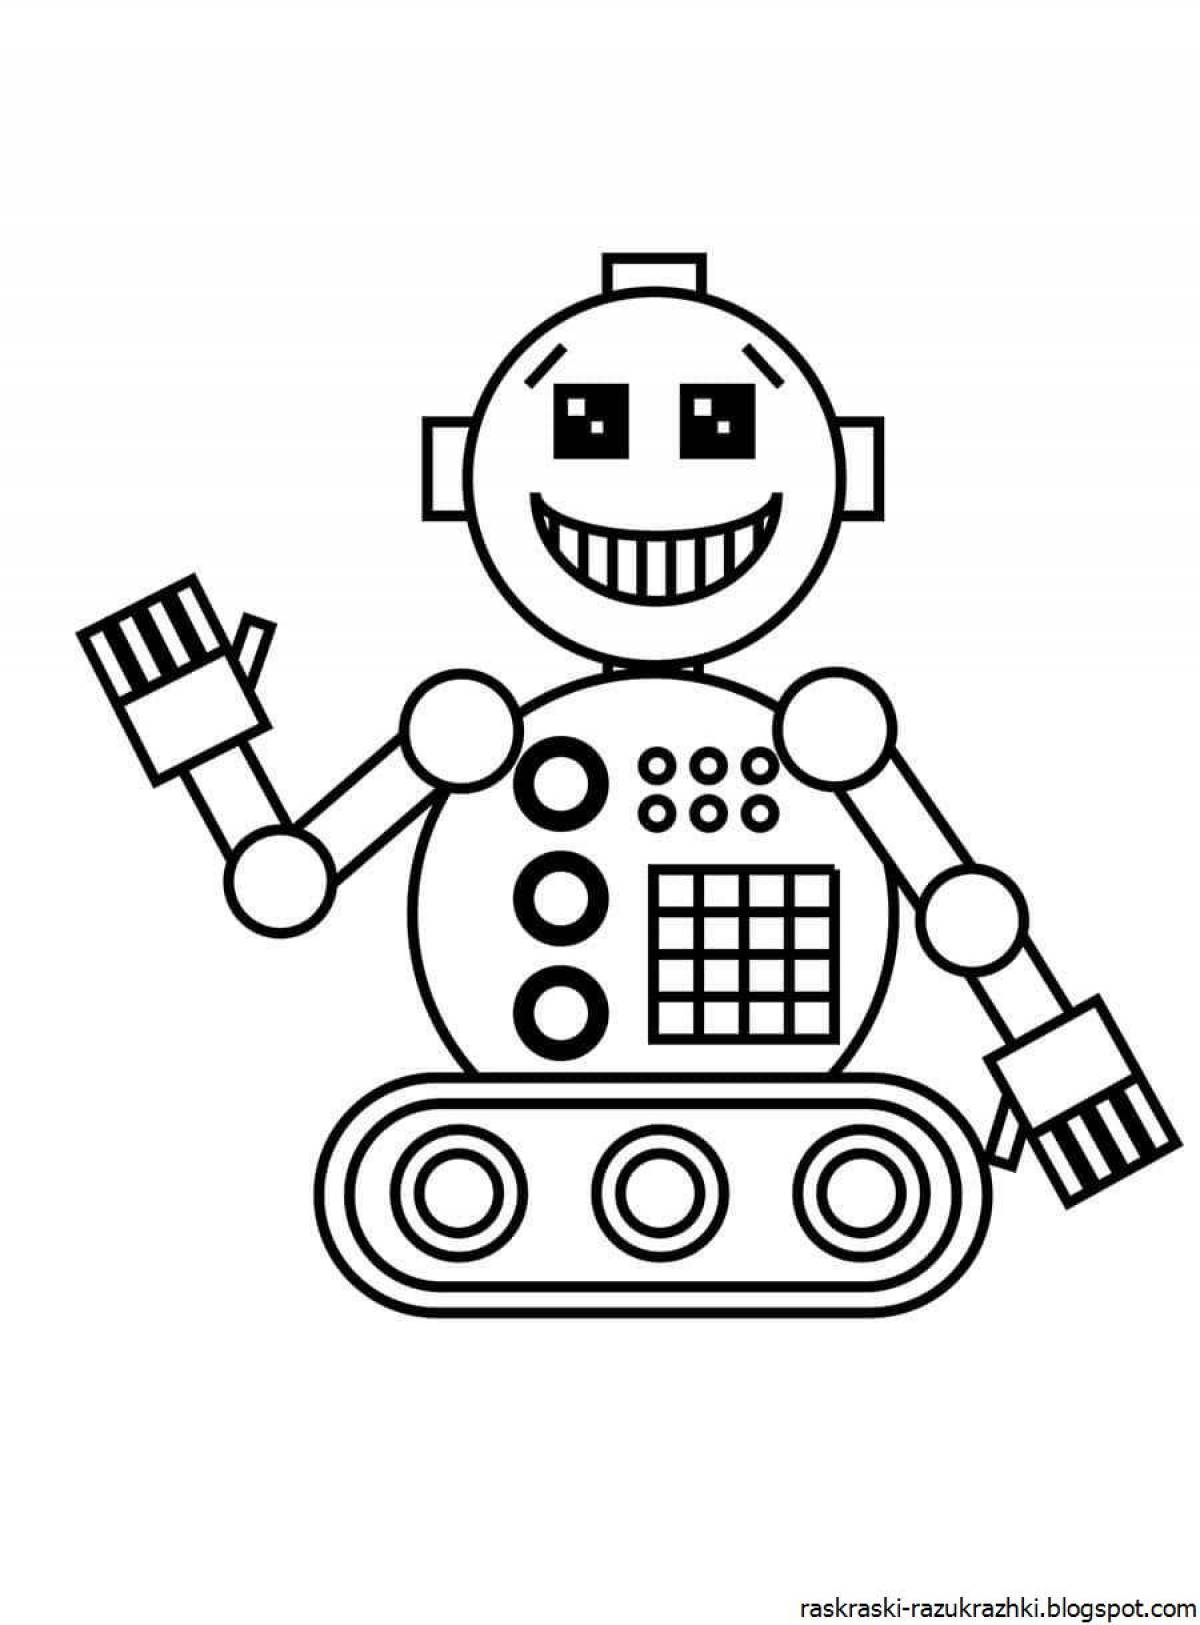 Fun coloring robot for 3-4 year olds